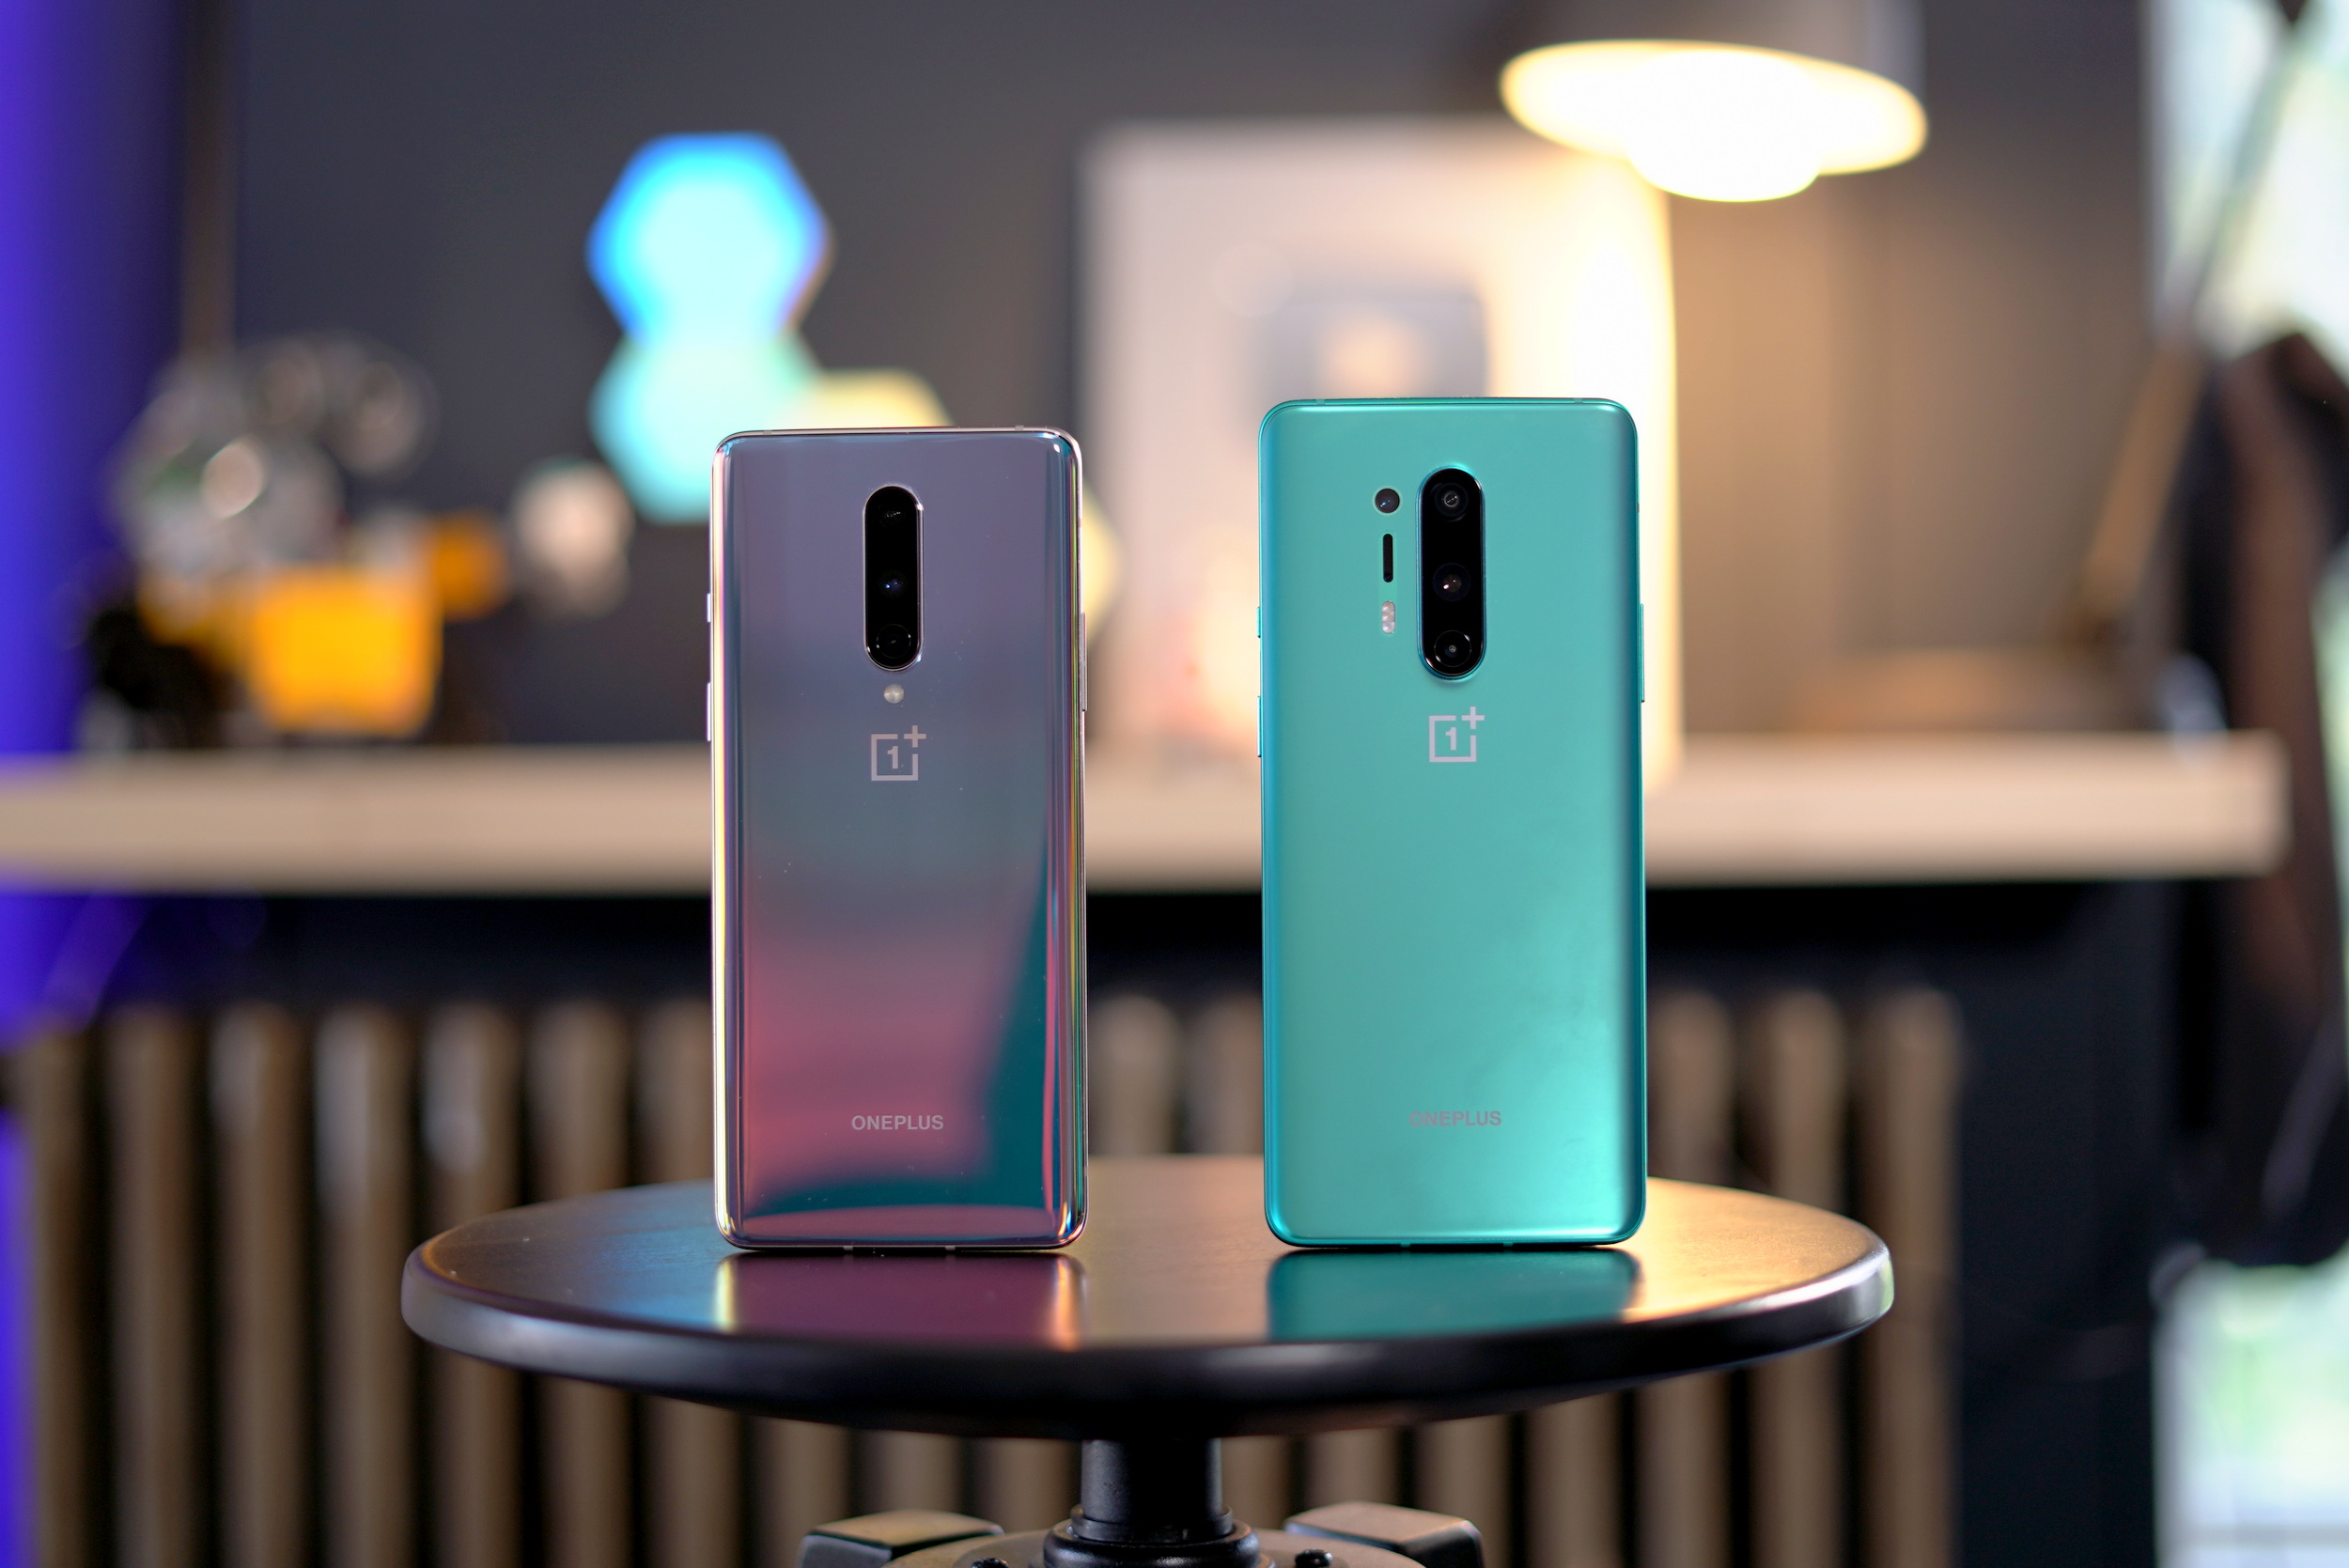 Oneplus 8 Versus Oneplus 8 Pro Camera Comparison Is The Pro Really Better Phandroid